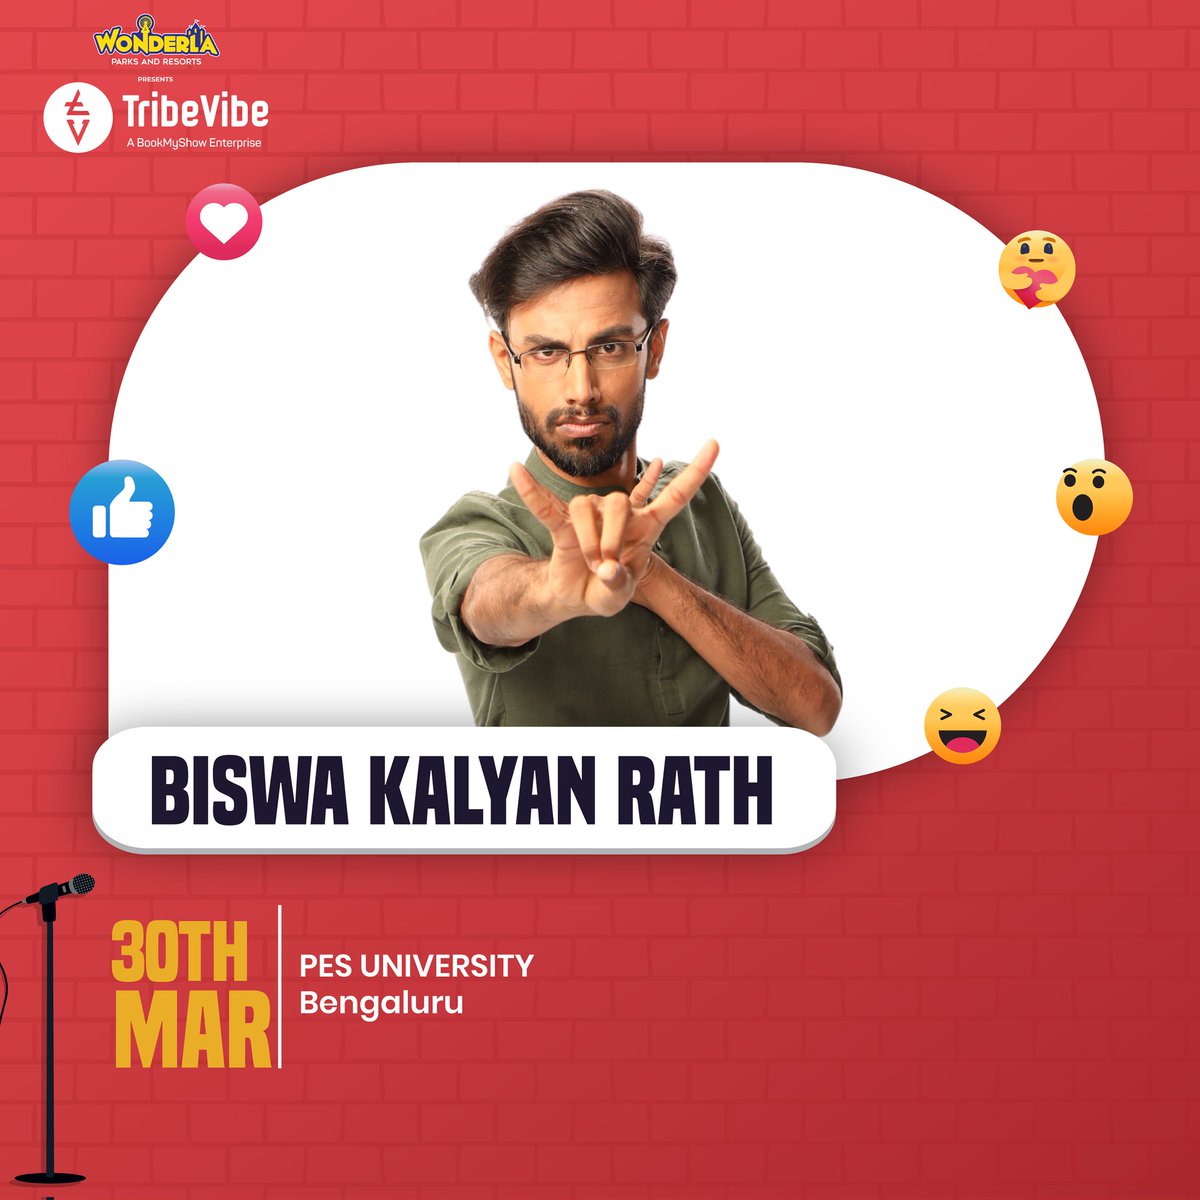 BENGALURU! @BiswaKalyanRath is all set to take the spotlight with his humor-packed performance🤩

We'll see you at PES University, Bengaluru on 30th March 🙌🏼

#tribevibe #biswa #biswakalyan #standupcomedy #standup #indiancomic #bengaluru #bengalurufest #collegefestival